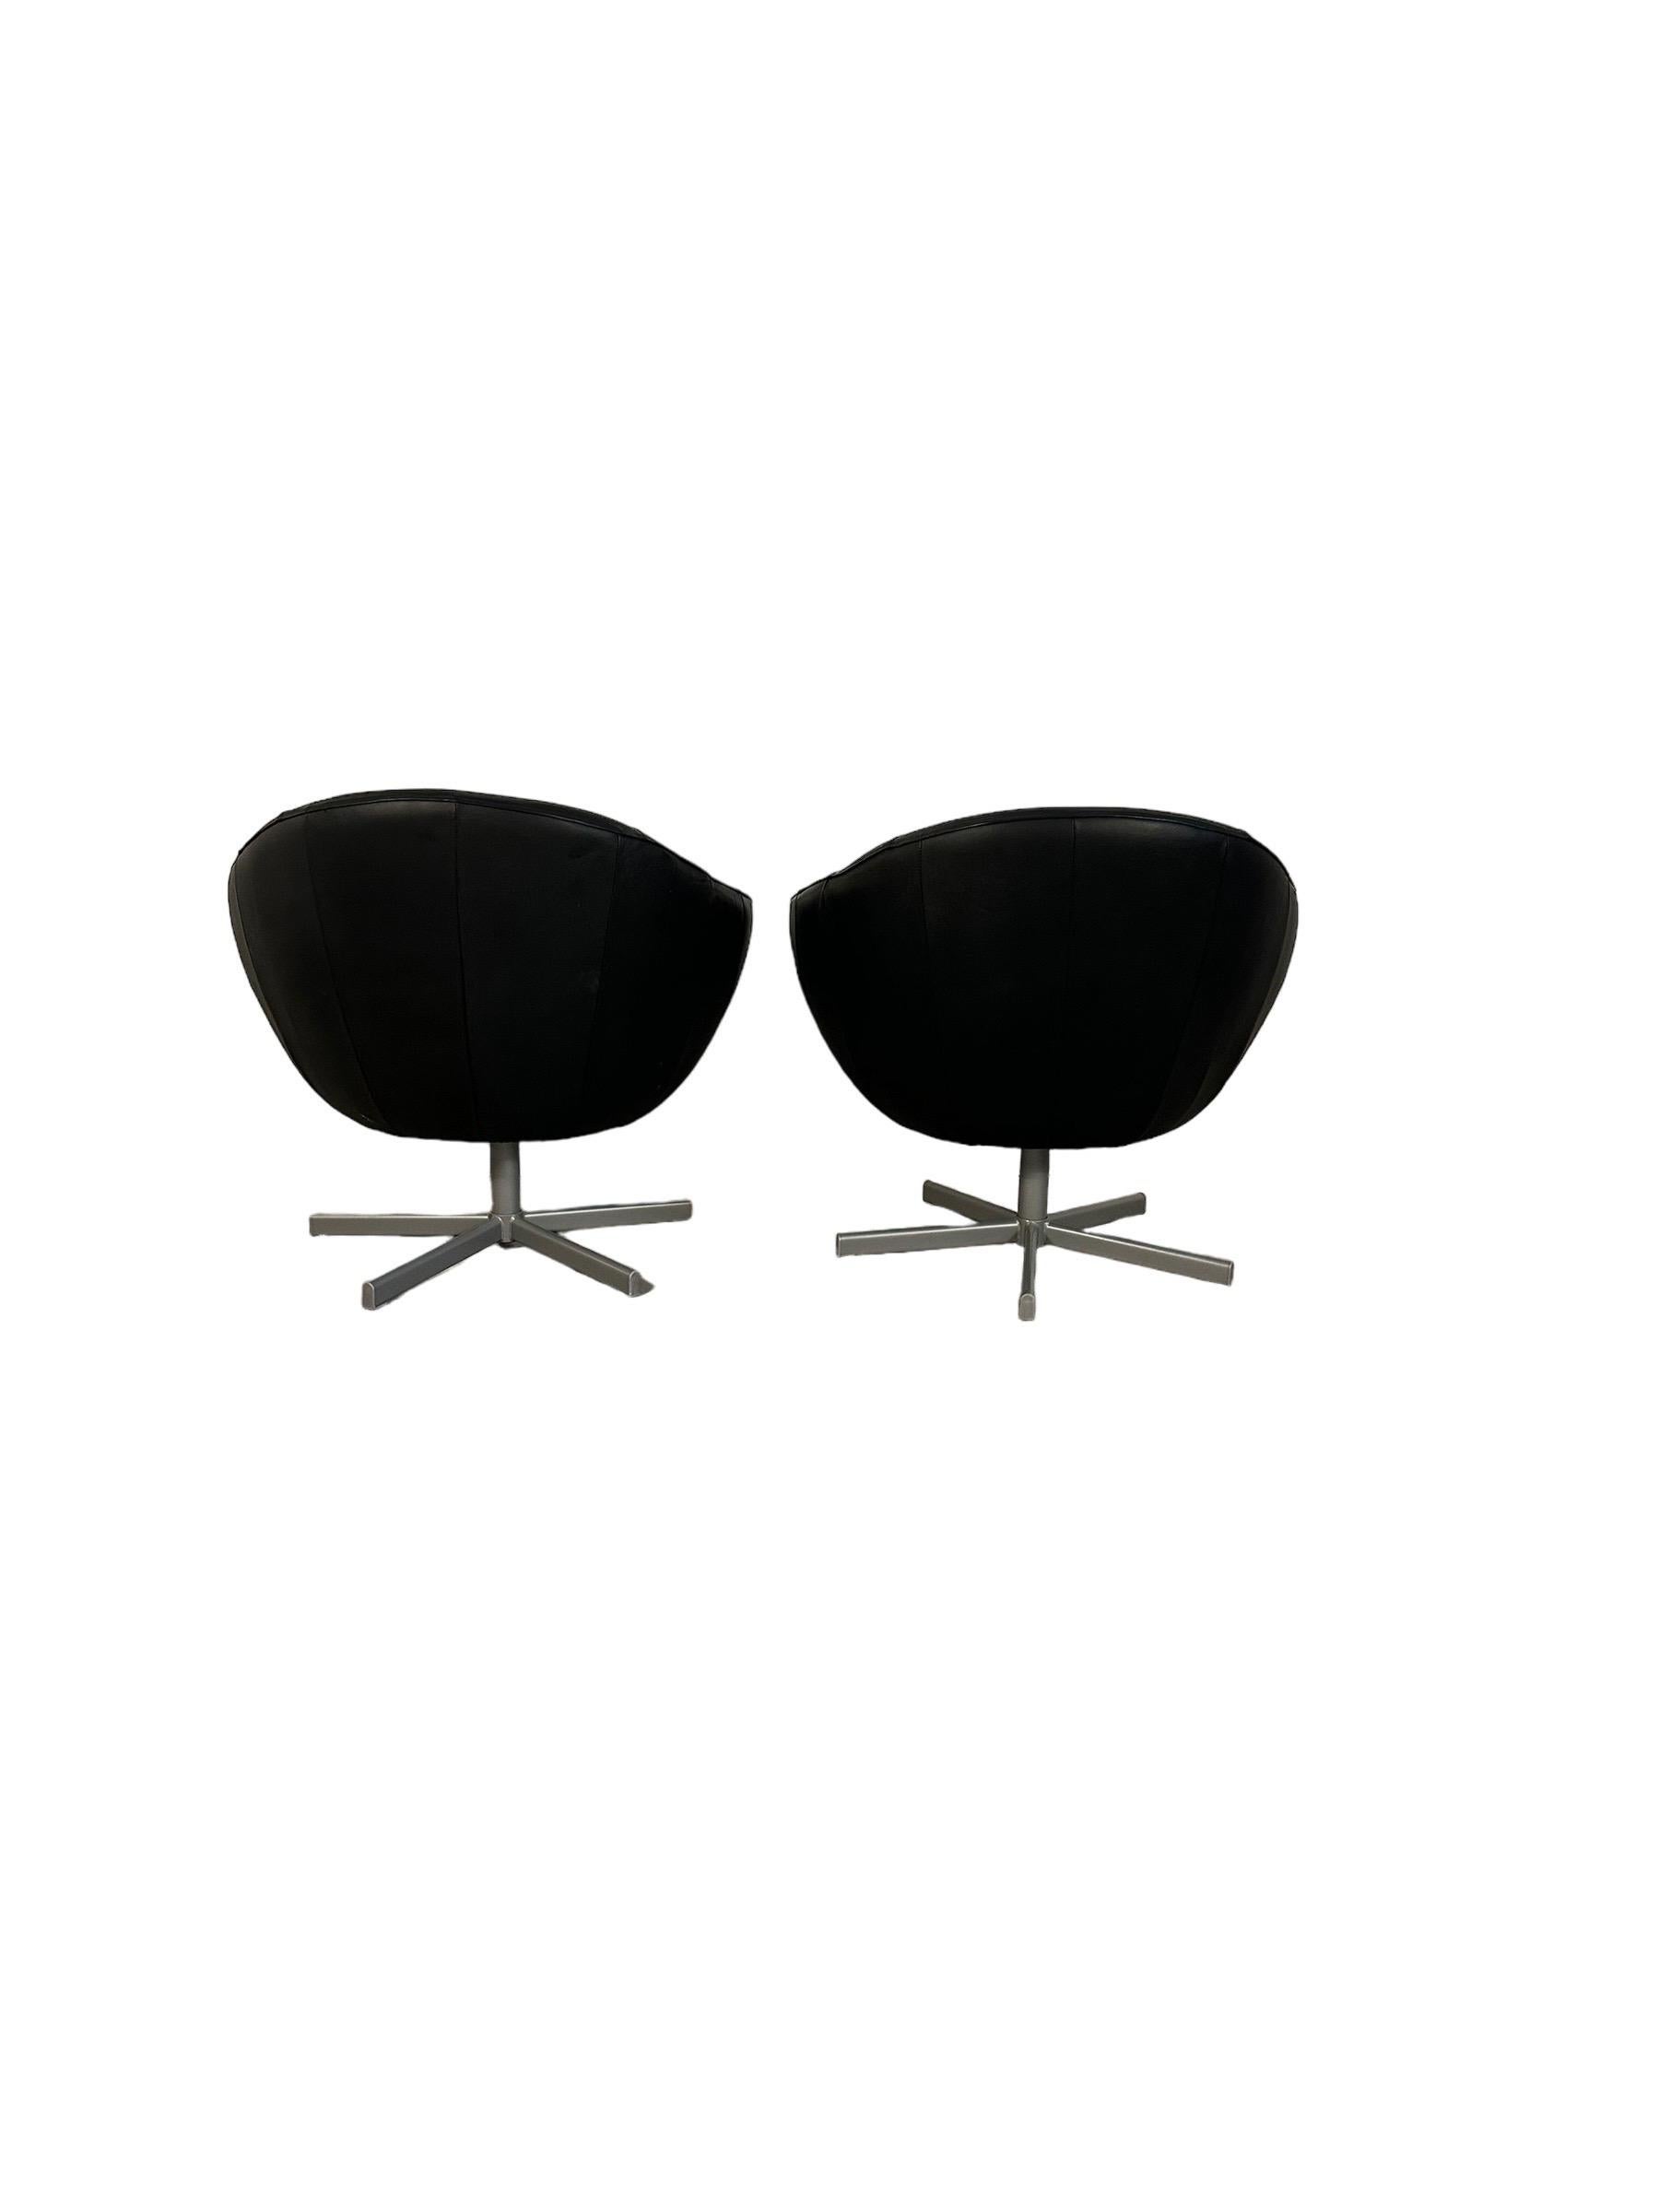 Pair Mid Century Modern Swiveling Leather Pod Chairs In Good Condition For Sale In Brooklyn, NY